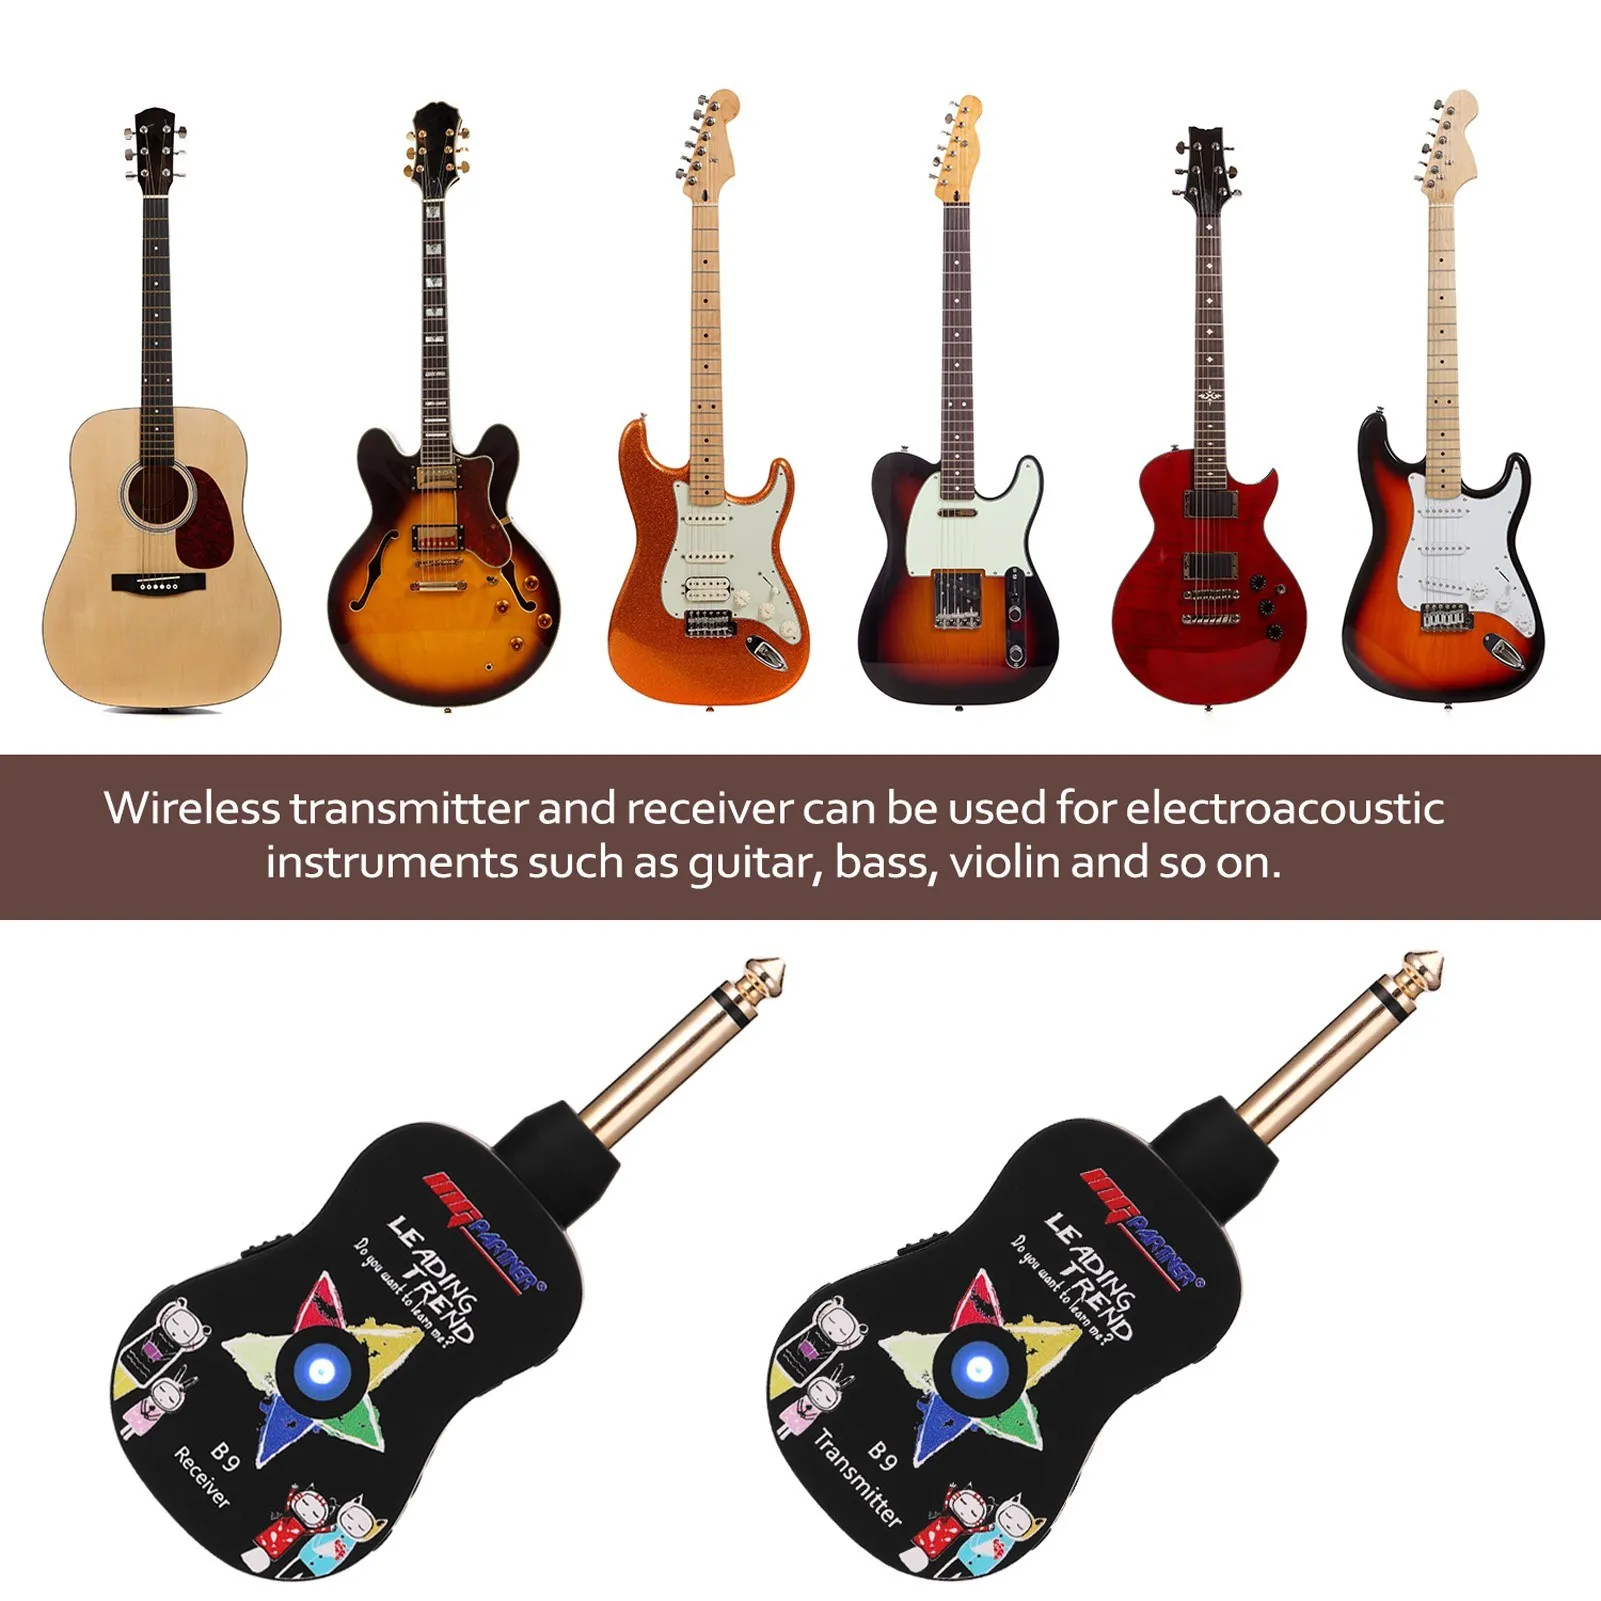 B9 Wireless Guitar System Rechargeable 4 Channels Guitar Transmitter Receiver Set Electric Guitar Bass Pick Up